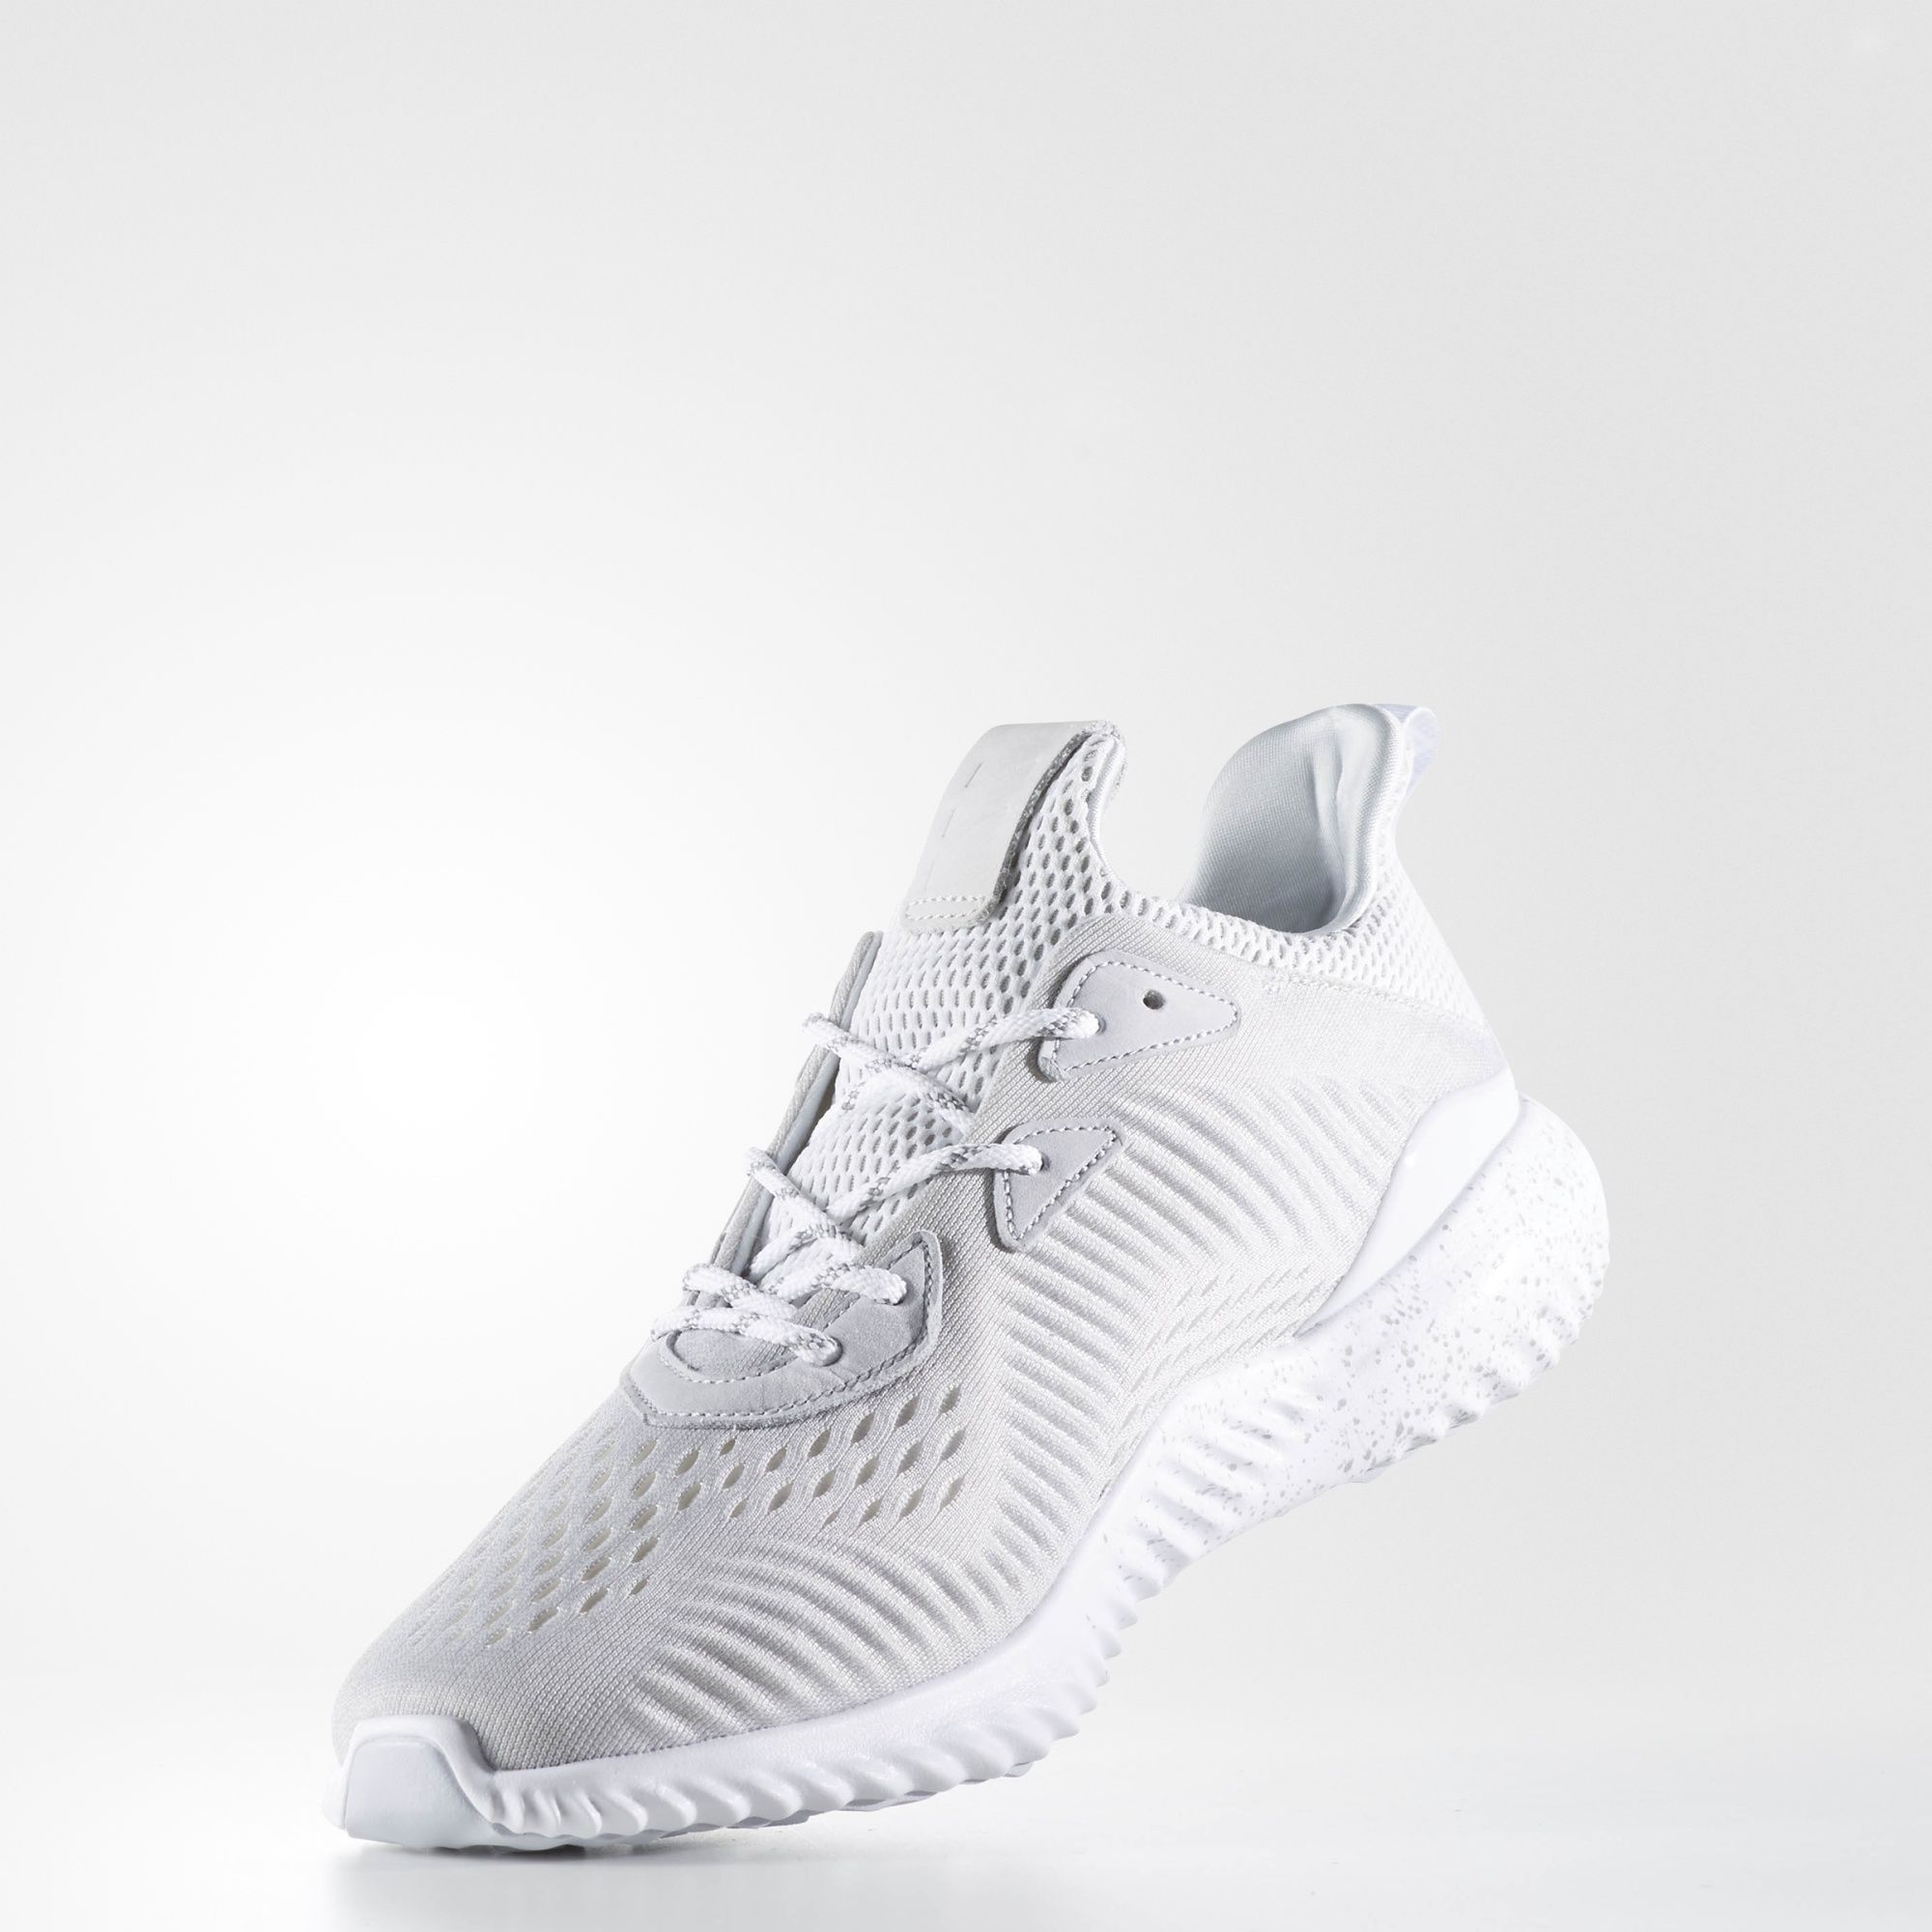 adidas-alphabounce-reigning-champ-3